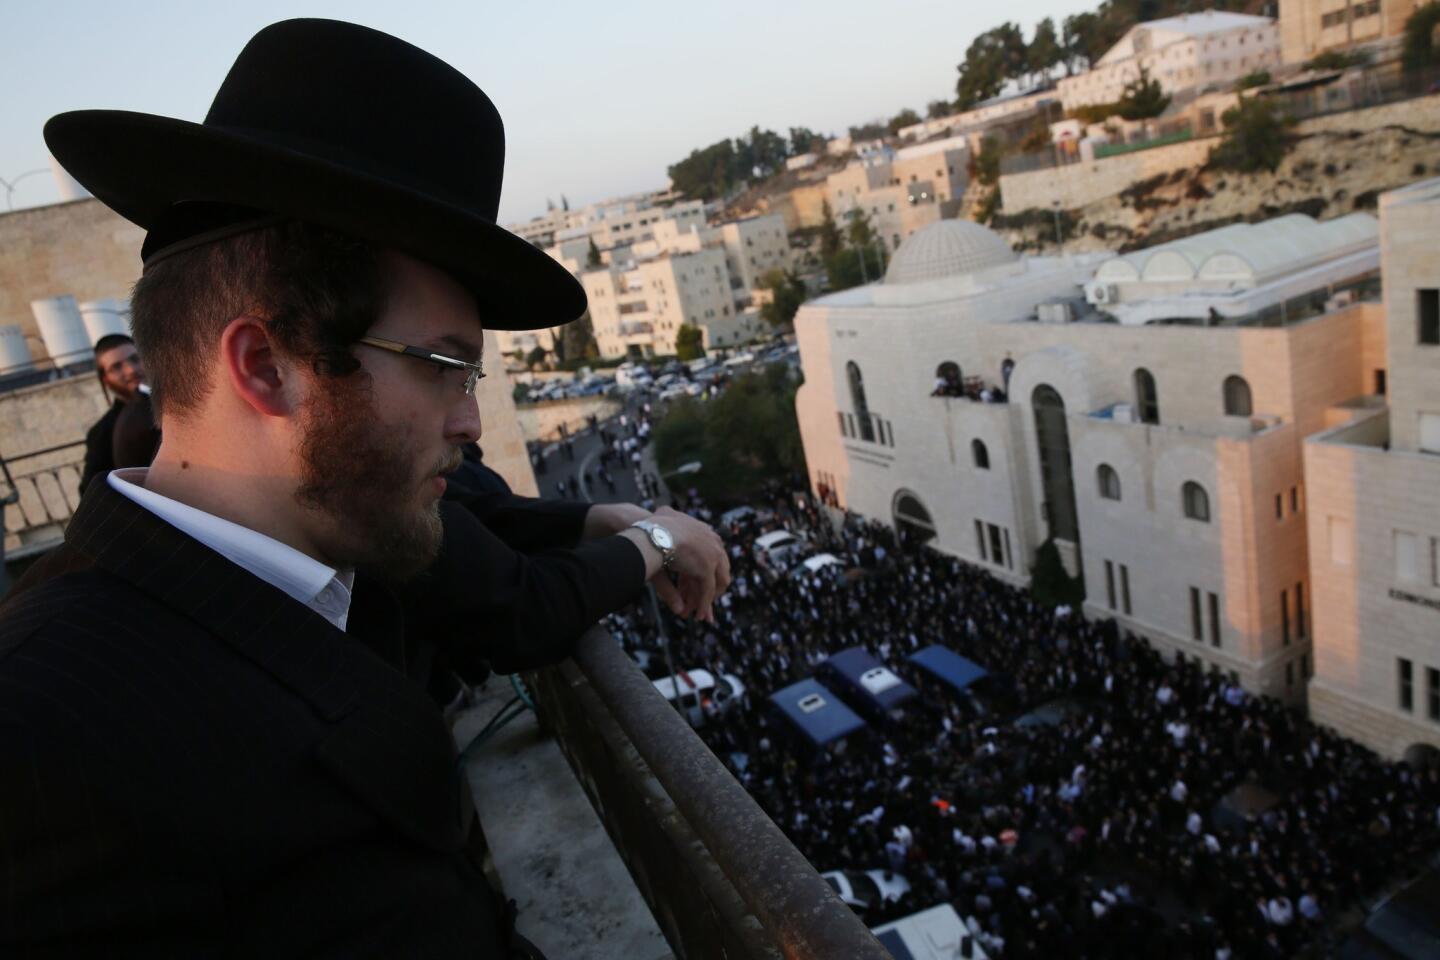 A man looks down at people mourning near the bodies of victims of an attack at a synagogue in Jerusalem.